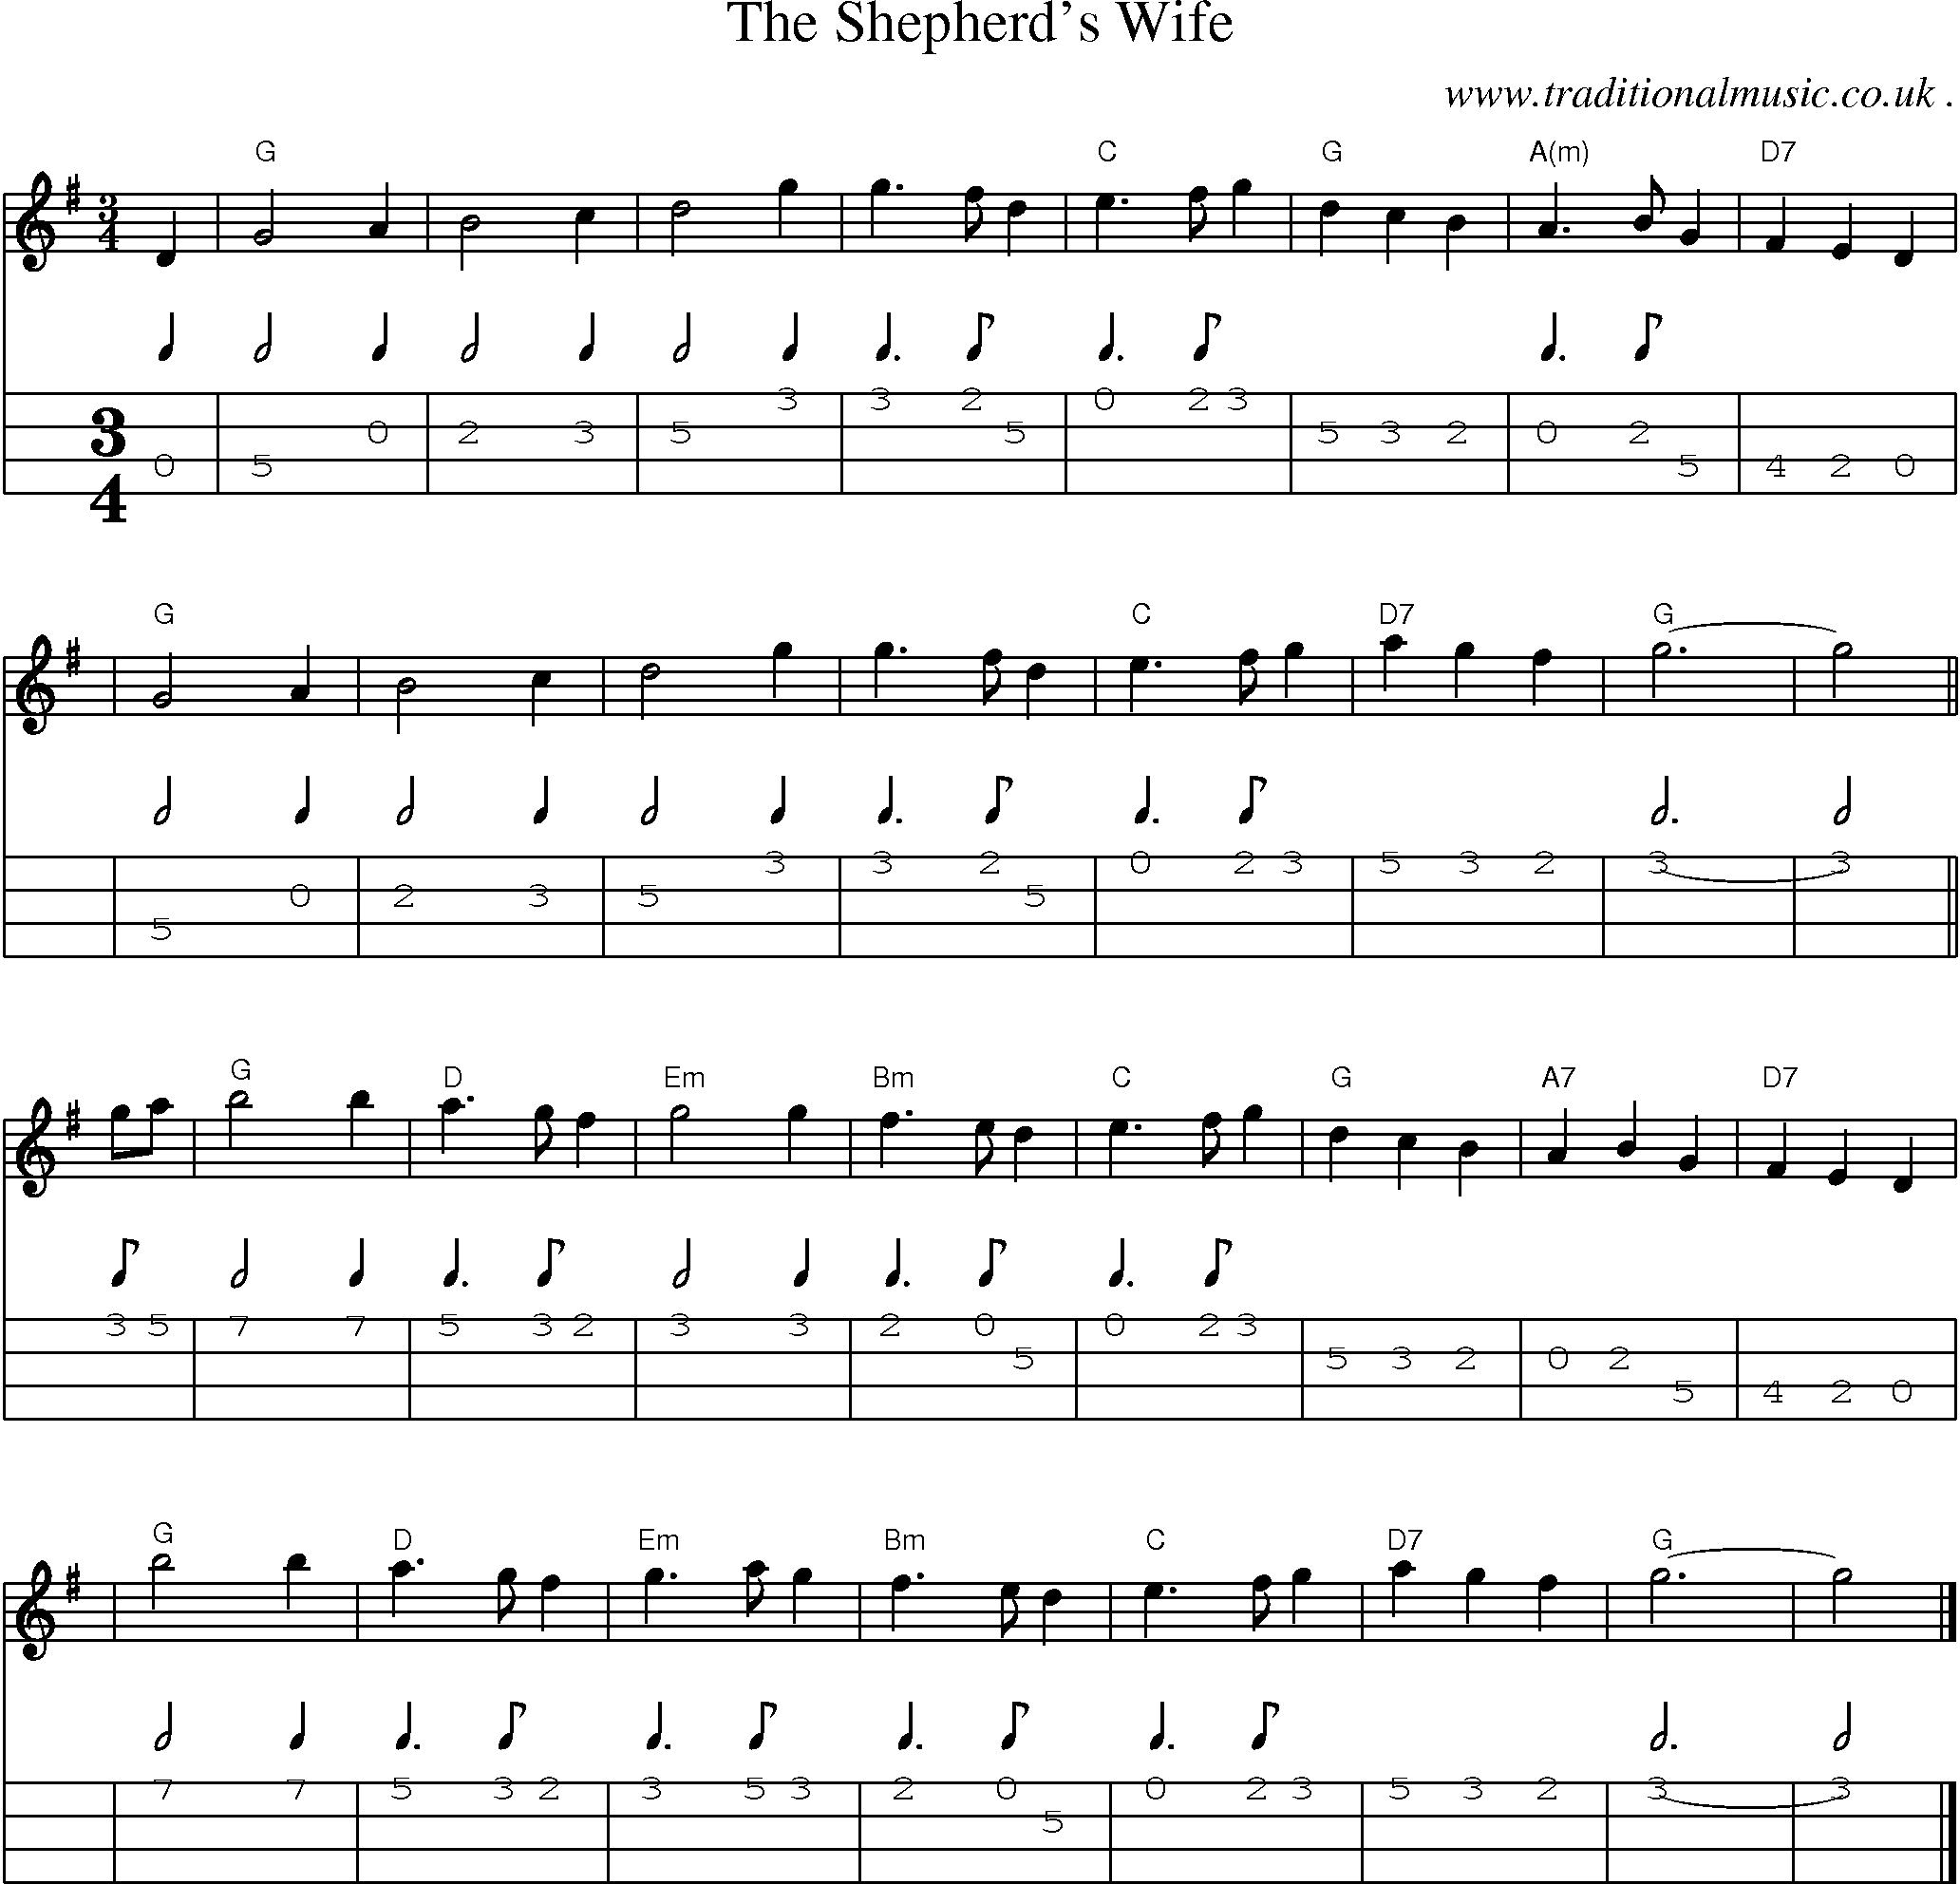 Sheet-music  score, Chords and Mandolin Tabs for The Shepherds Wife